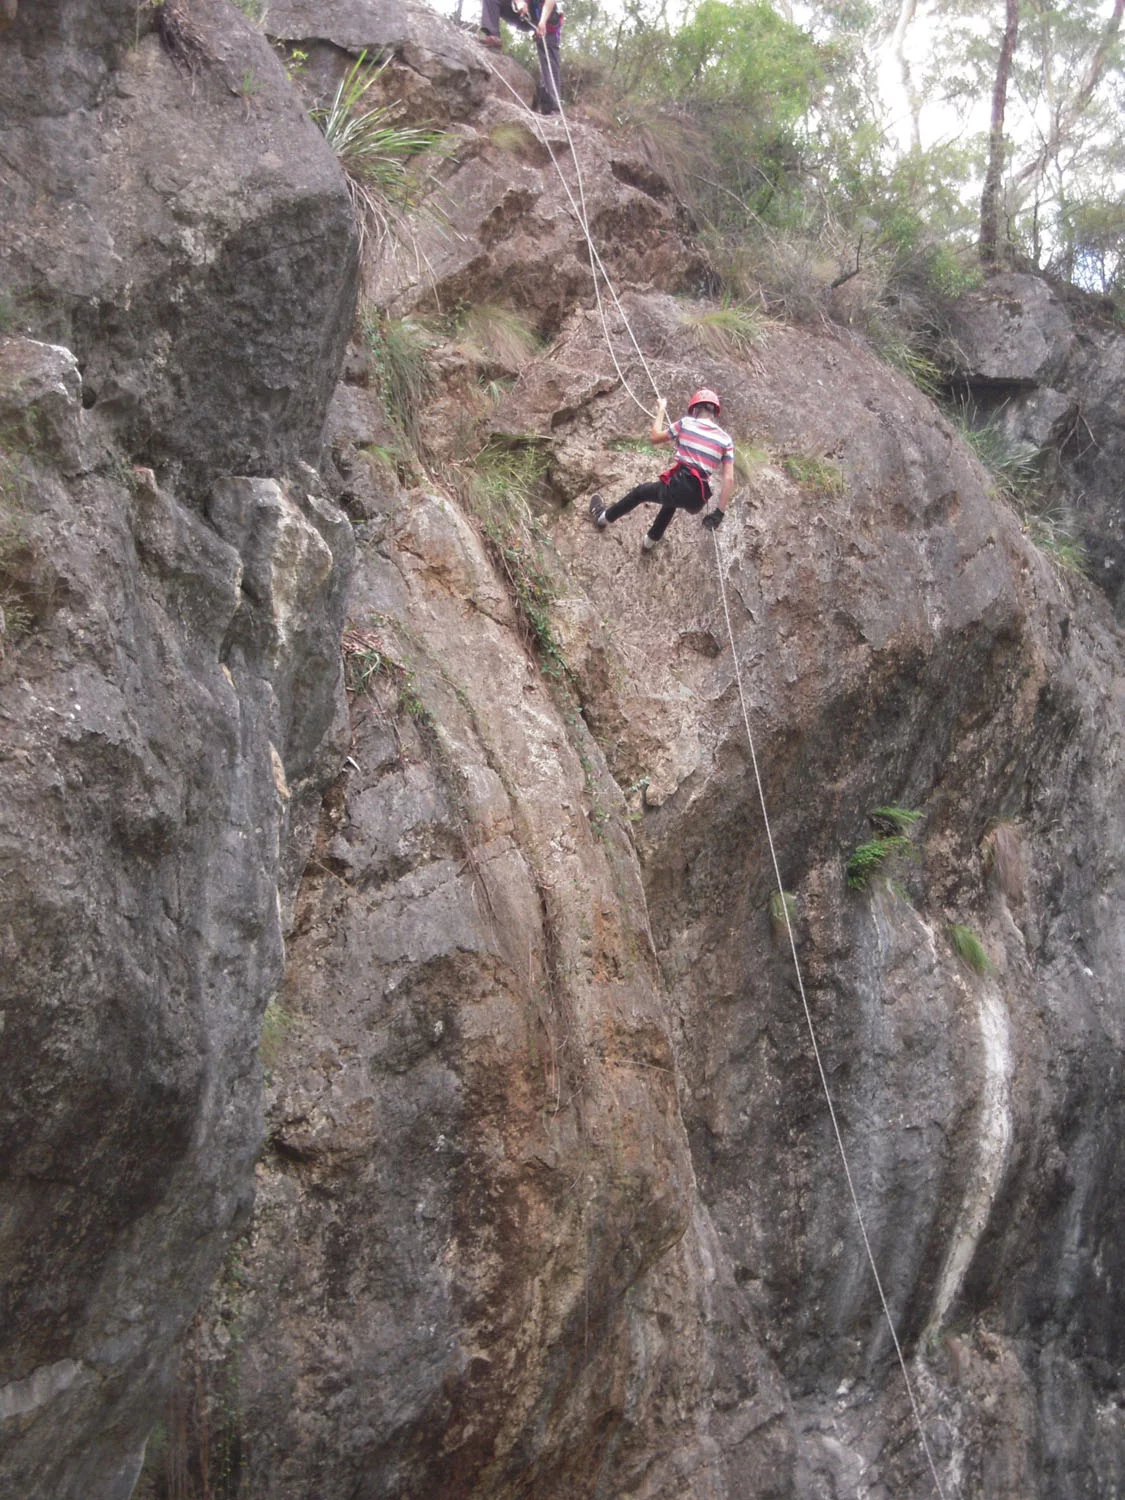 Abseiling - overcoming fear